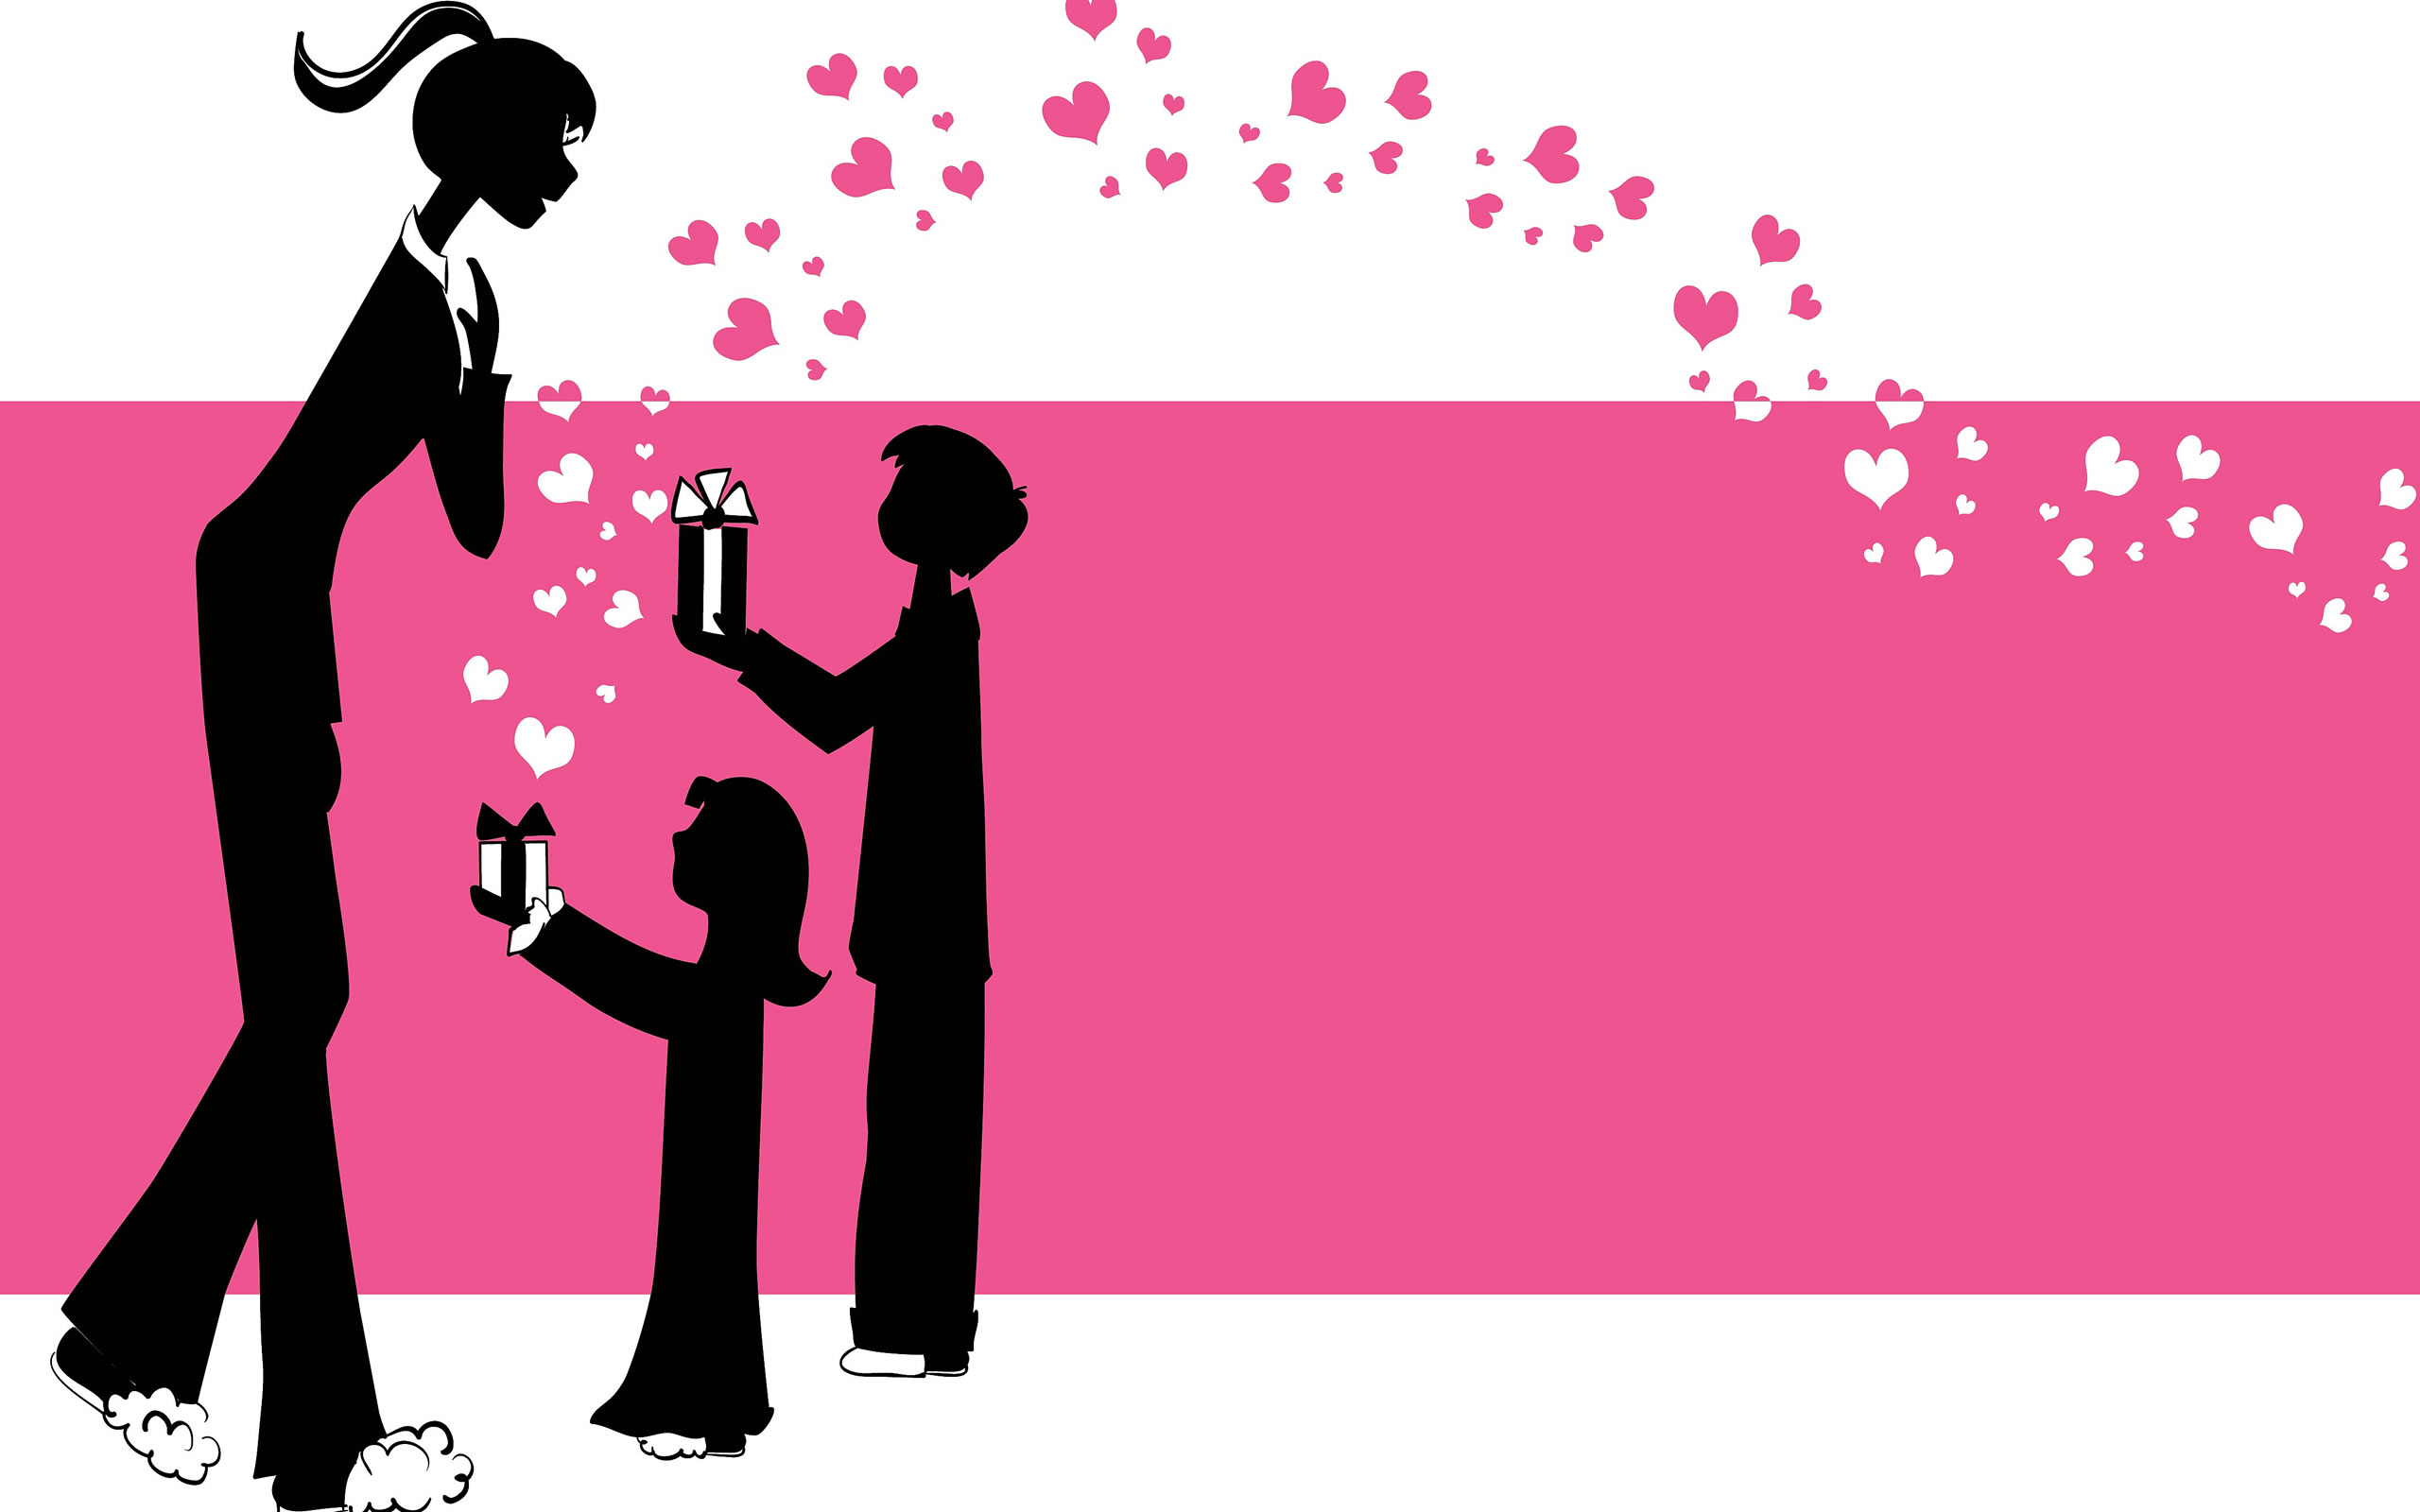 HD Wallpapers 2011 Happy Mother's Day Gifts and Cards